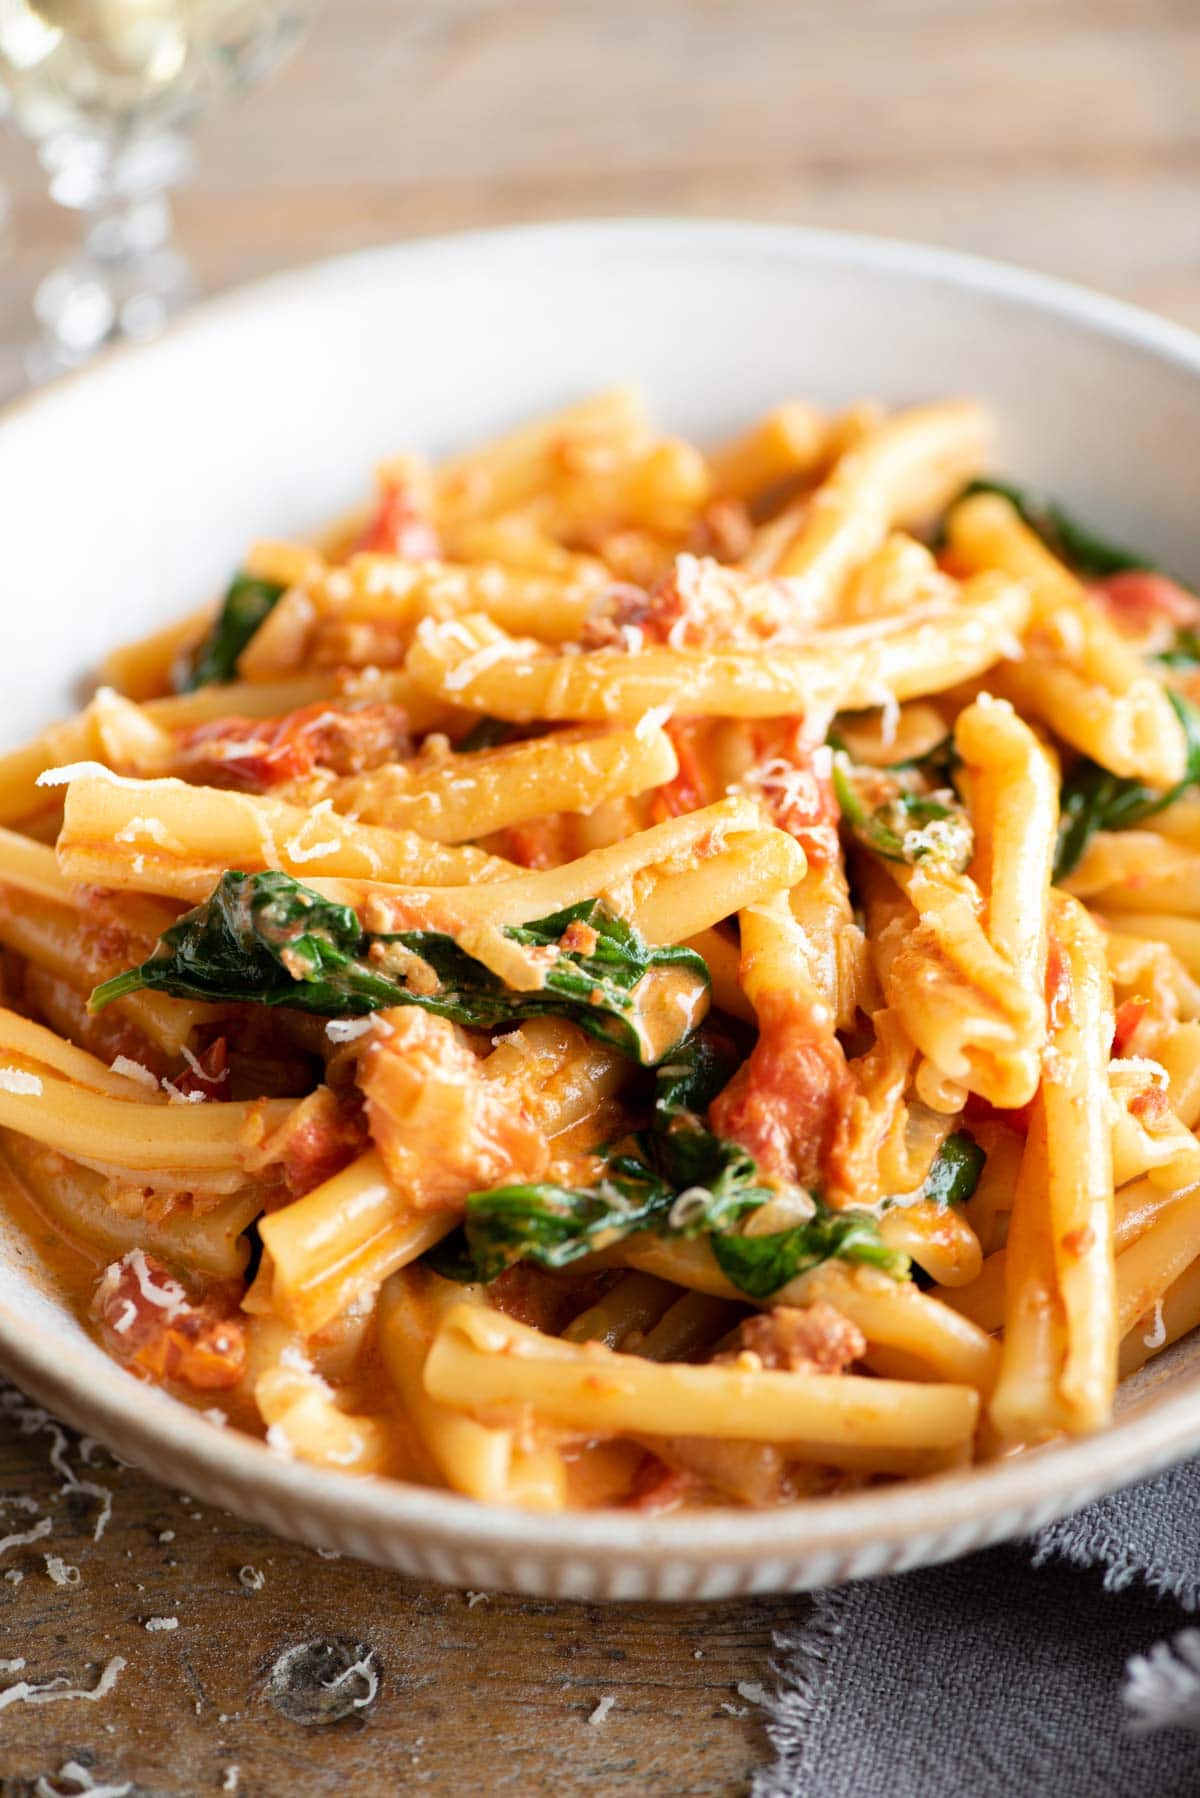 A close up of pasta with Nduja sauce, spinach and tomatoes